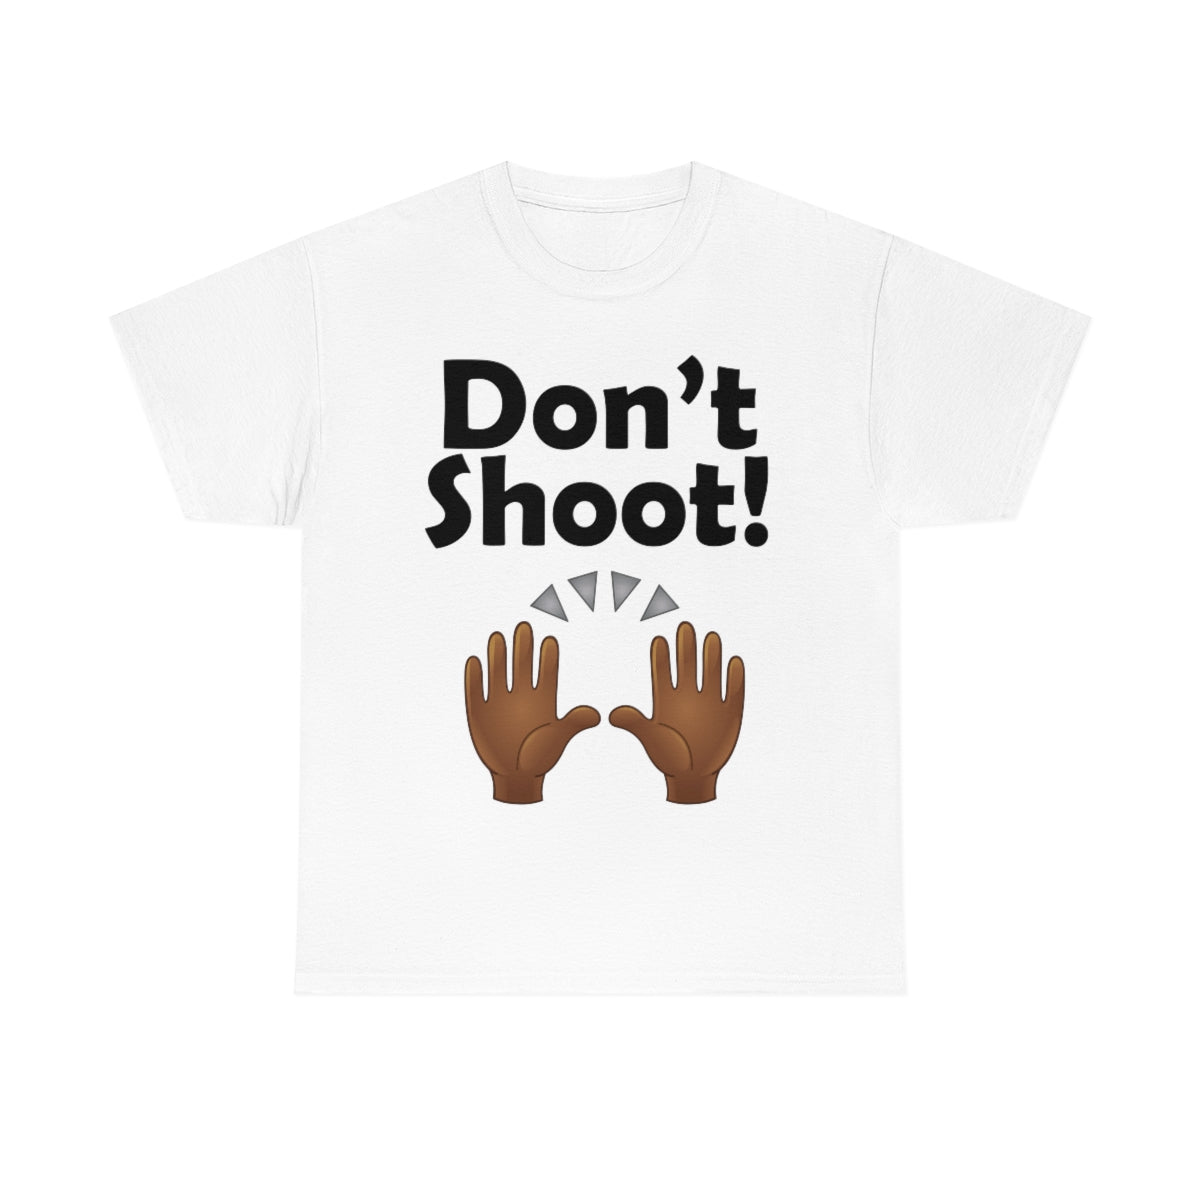 "Don't Shoot" Unisex T-Shirt (Available in White or Stone Gray)